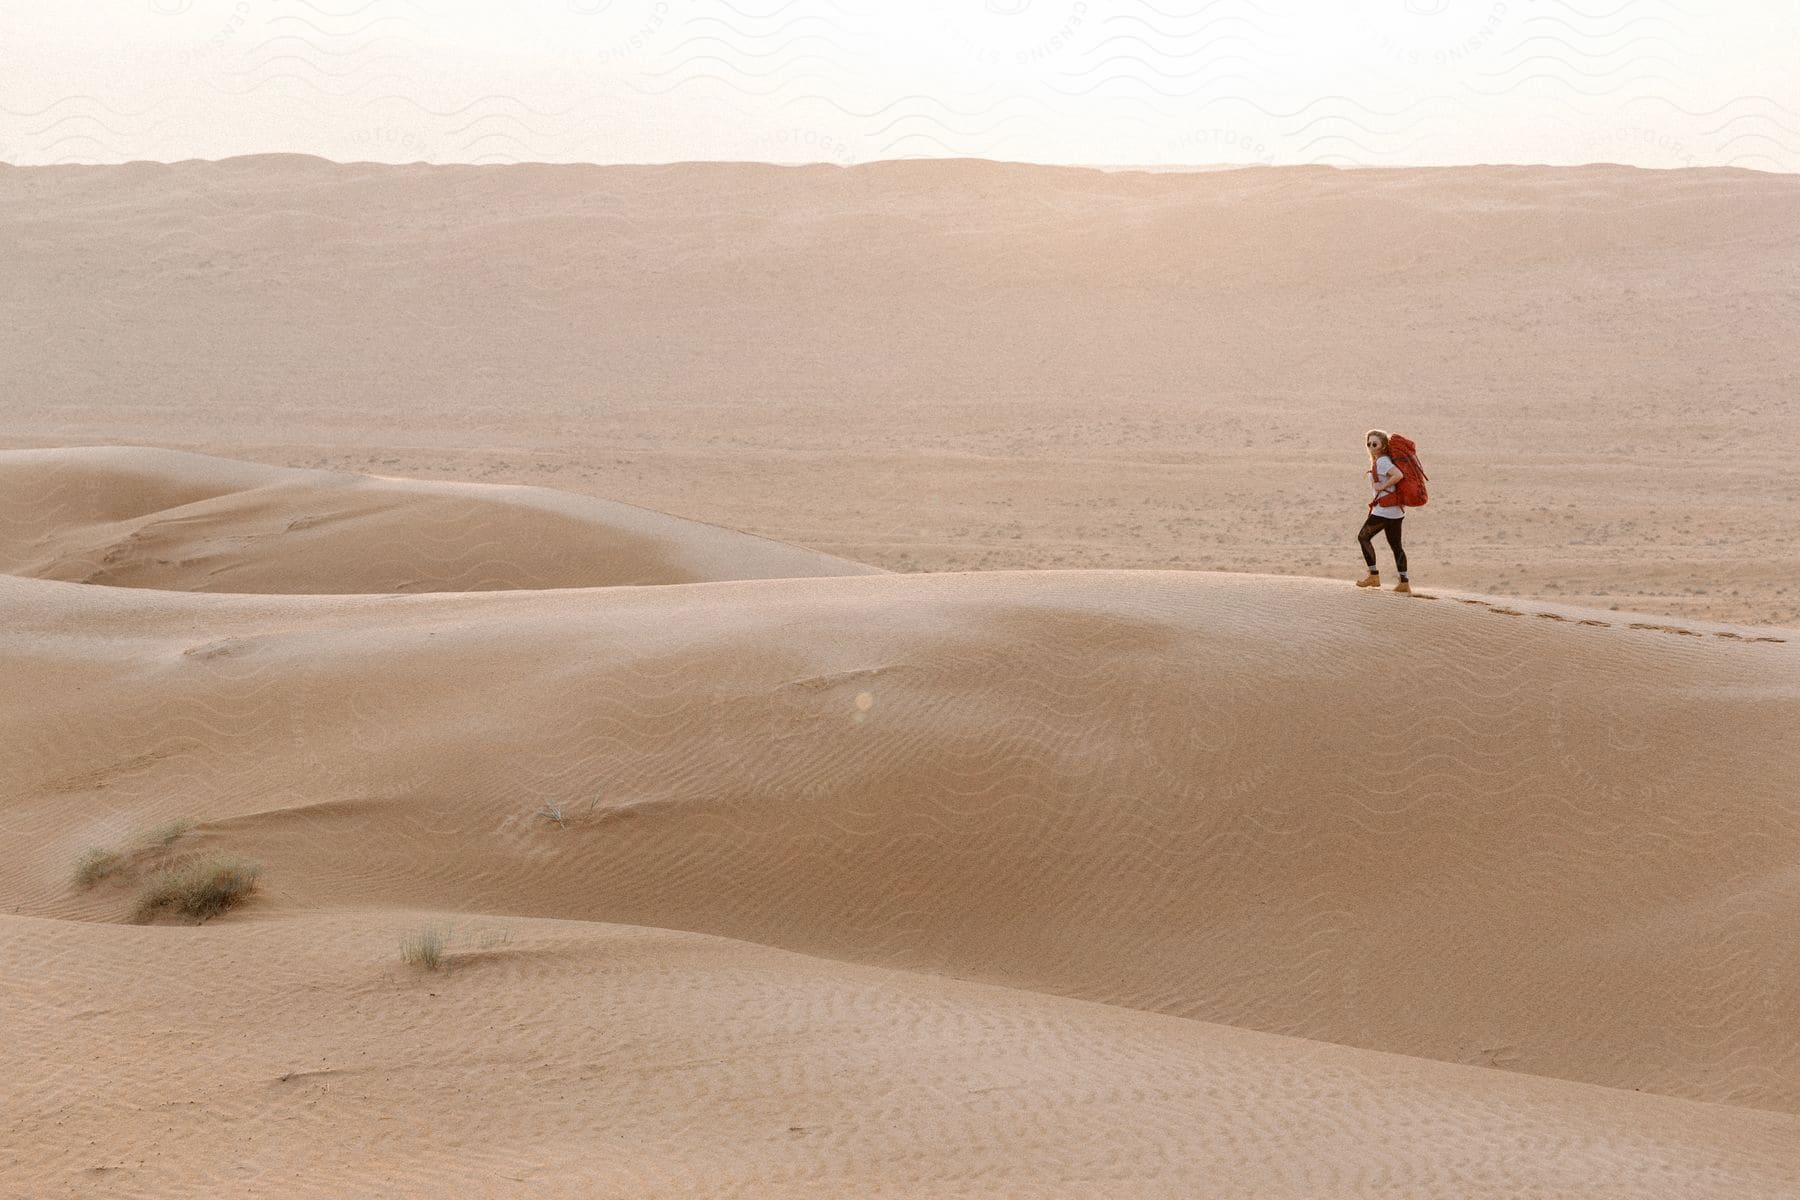 A hiker with a red backpack walks across a desert hill leaving footprints in the sand